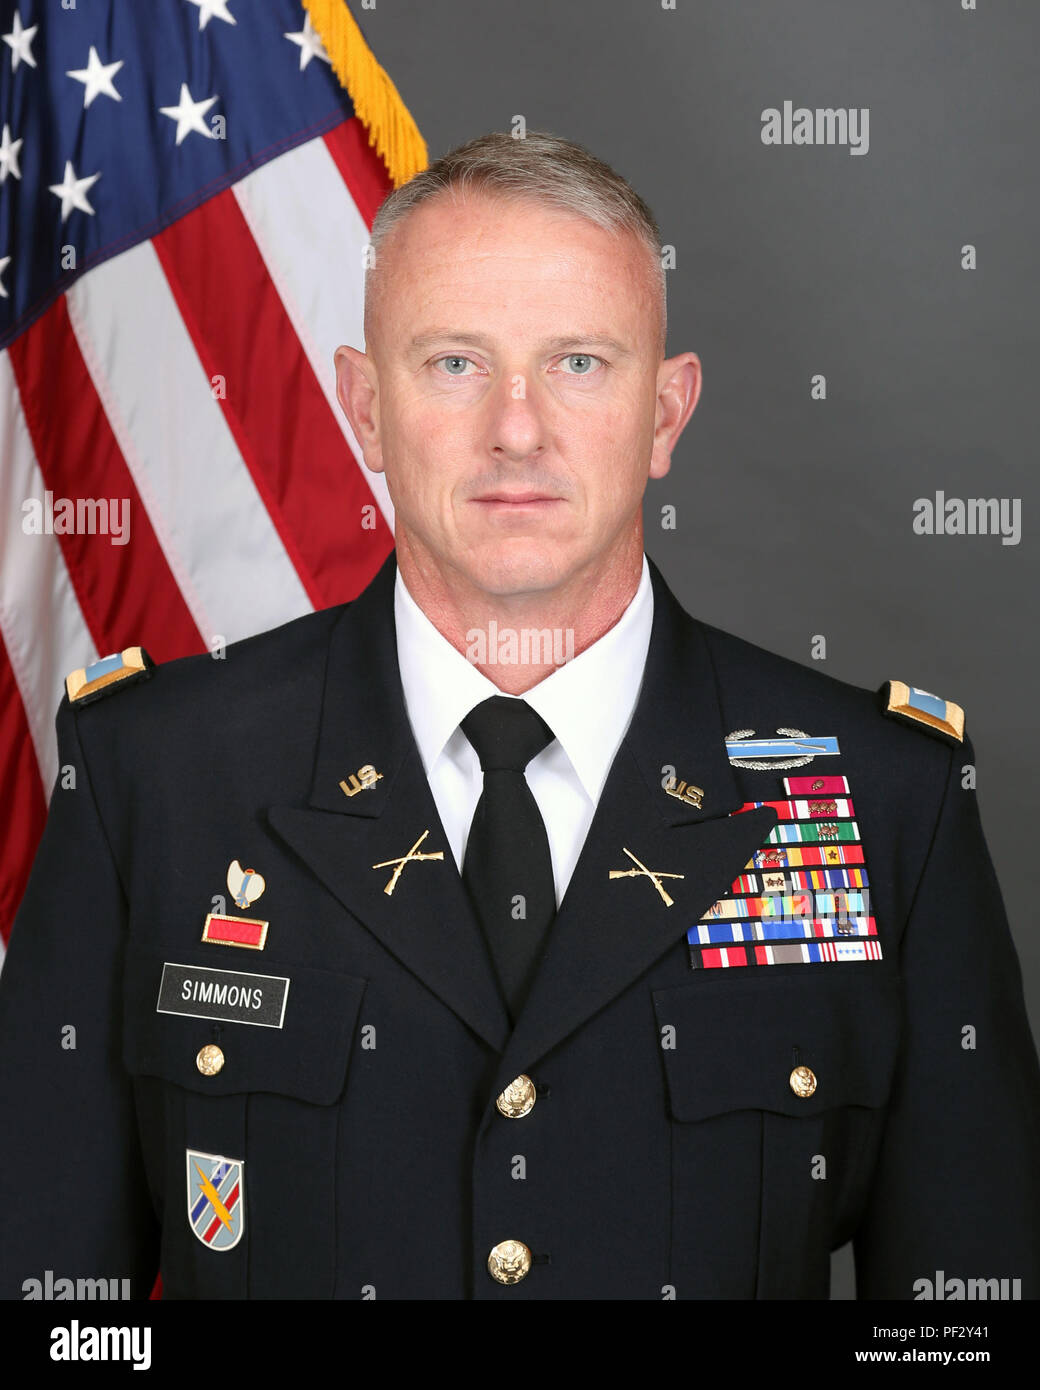 Georgia Governor Nathan Deal will appoint Col. Randall Simmons to serve as the Georgia National Guard’s Assistant Adjutant General-Army following the appointment of Brig. Gen Tom Carden as the new deputy commander of NATO’s Multi-National Division, Southeast, headquartered in Bucharest, Romania. Simmons has served as the Chief of Staff for the Georgia Army National Guard since 2015. He previously served as commander of the Macon-based 48th Infantry Brigade Combat Team and led the brigade during its 2013-2014 deployment to Afghanistan. Stock Photo